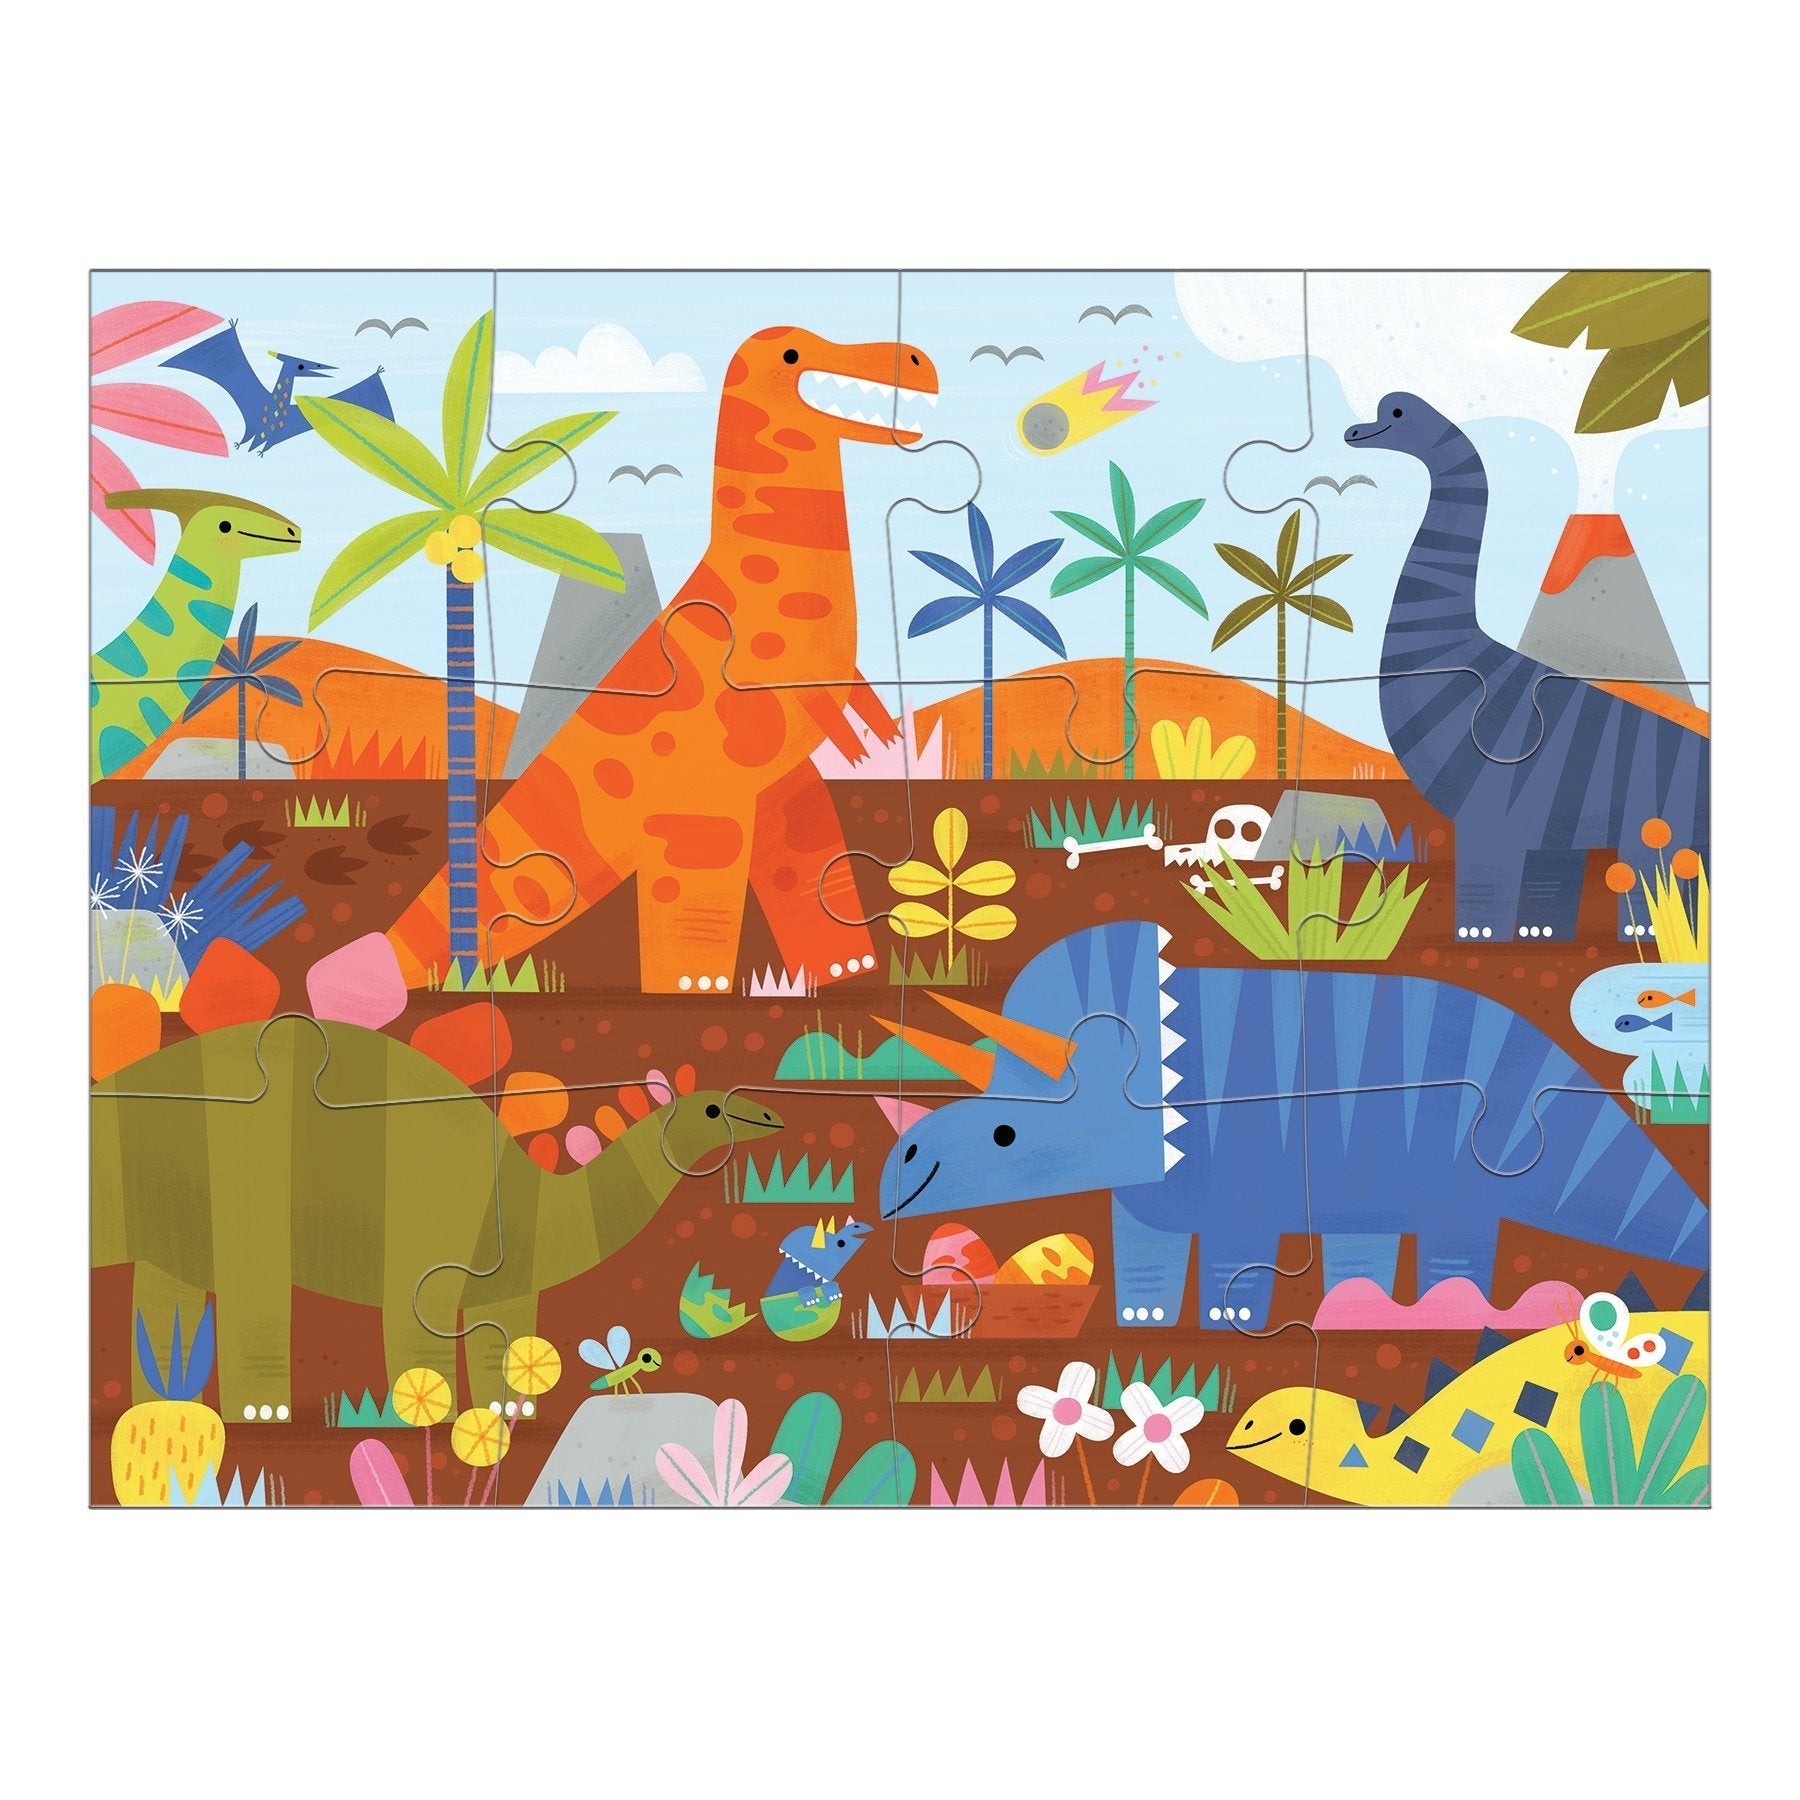 Can You Spot? Dino Park 12 Piece Mudpuppy Puzzle